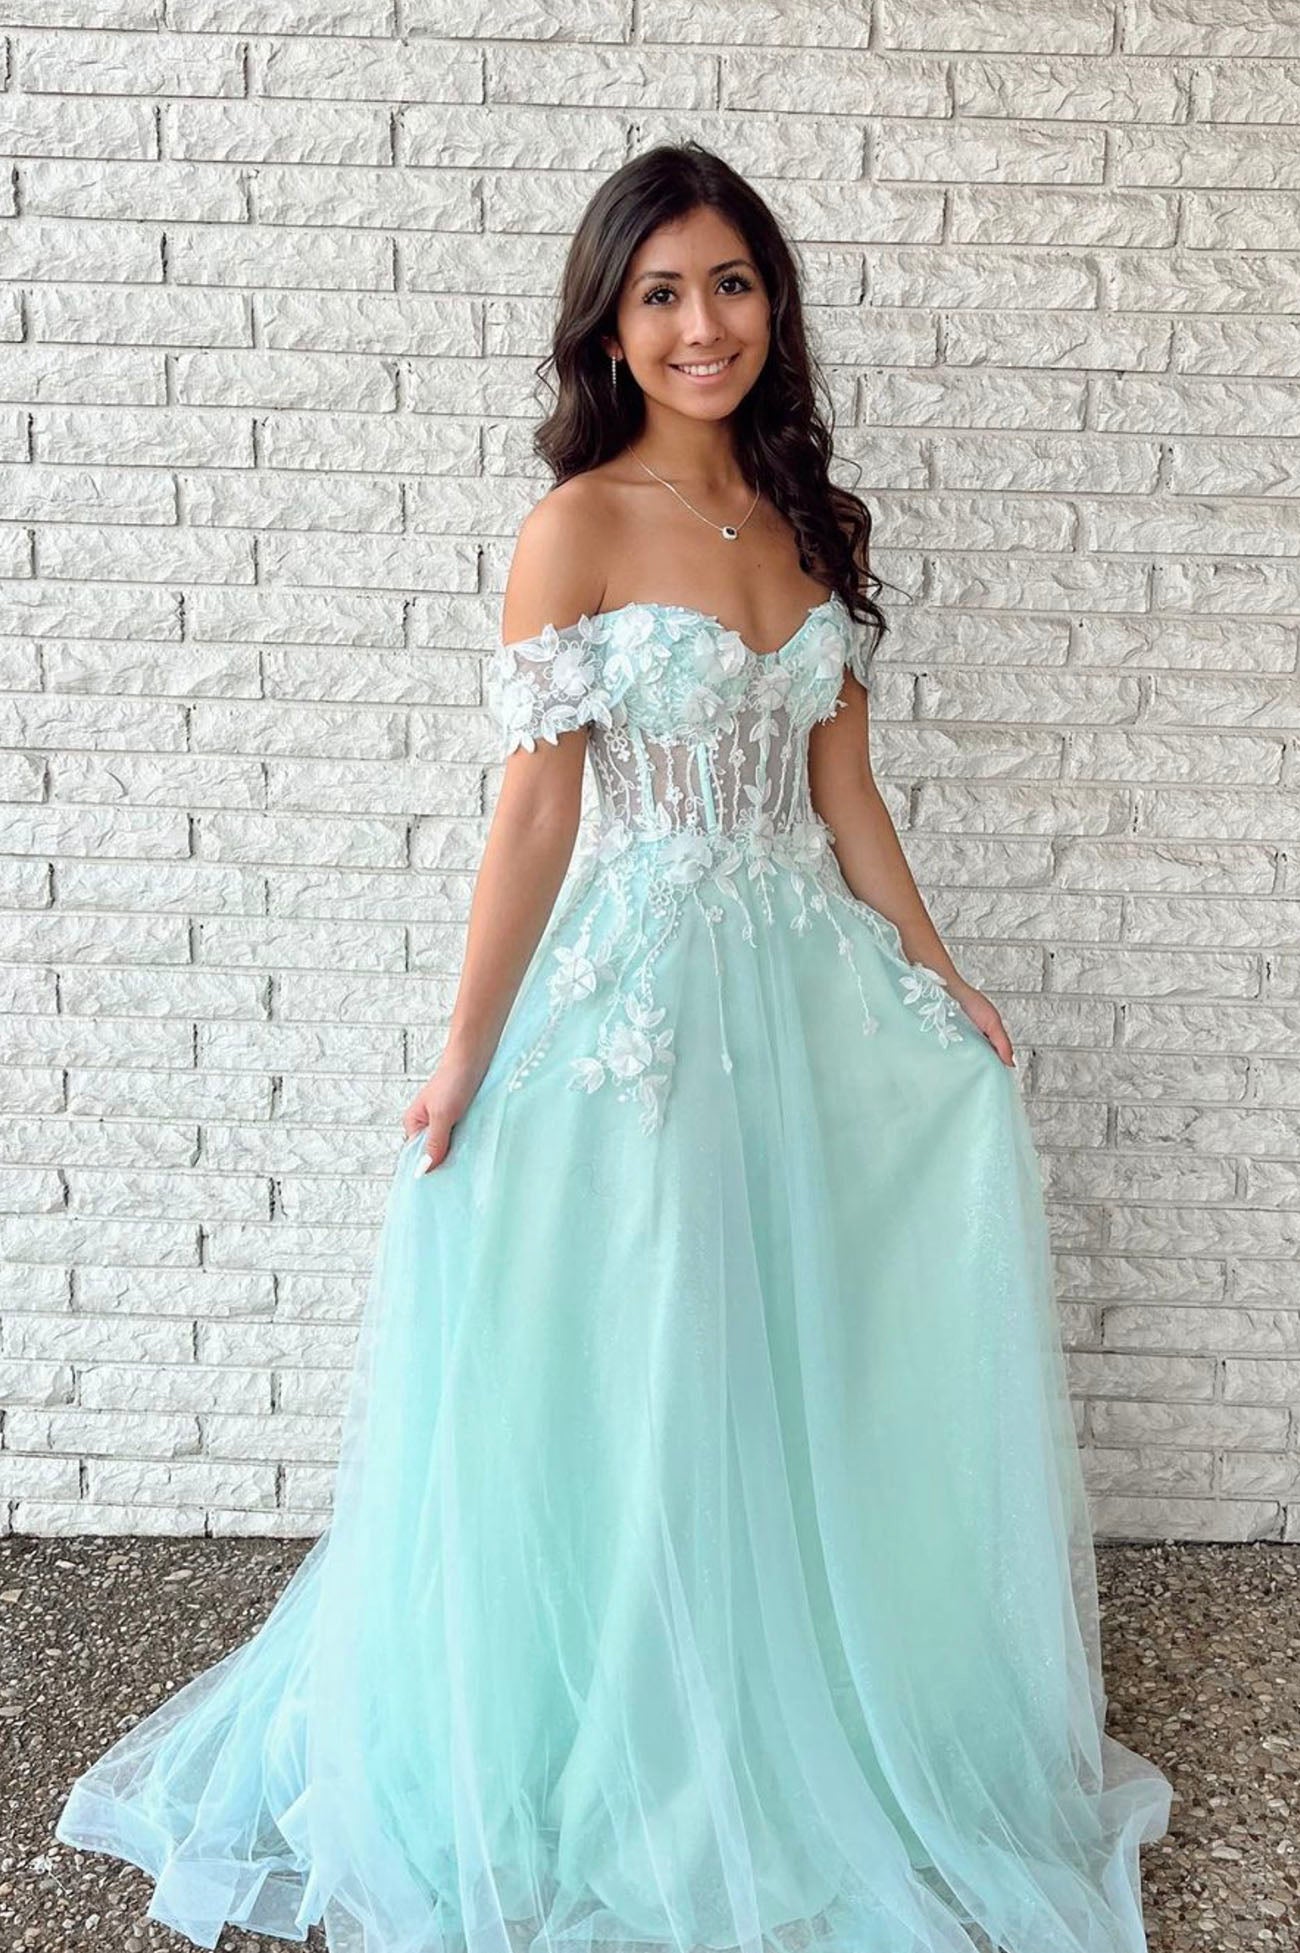 Beautiful Off the Shoulder Lace Floor Length Prom Dress